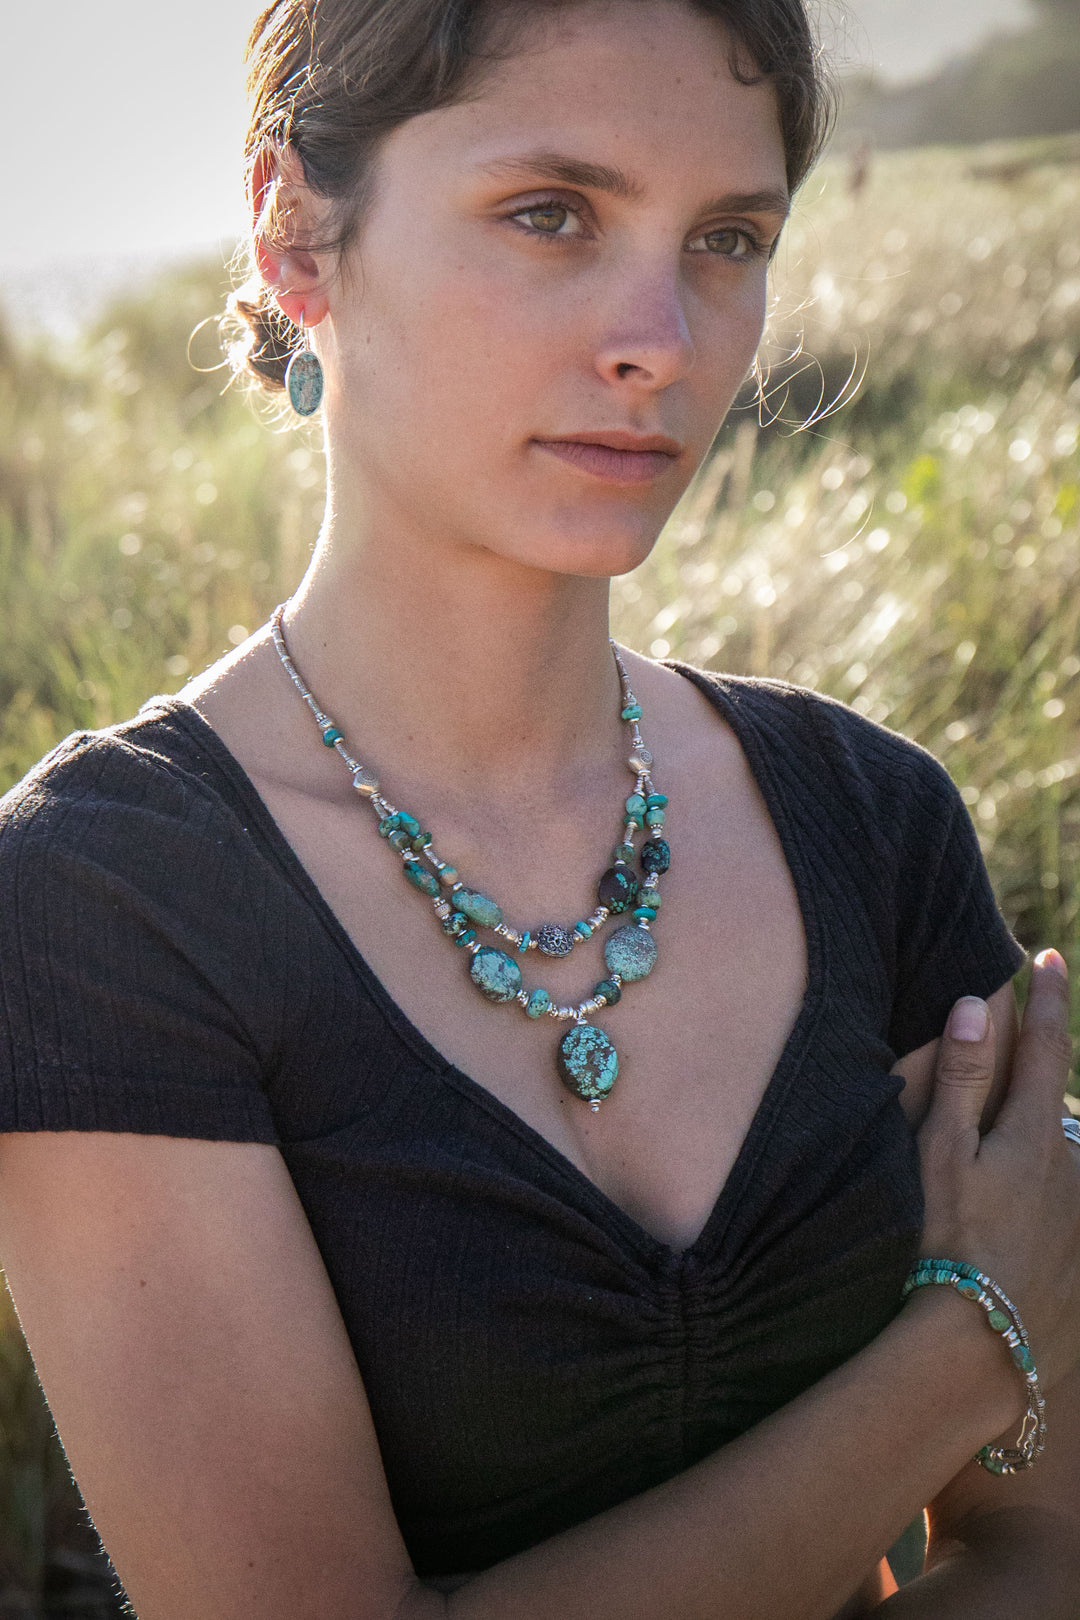 Statement Chunky Natural Turquoise Necklace with Thai Hill Tribe and Sterling Silver Beads